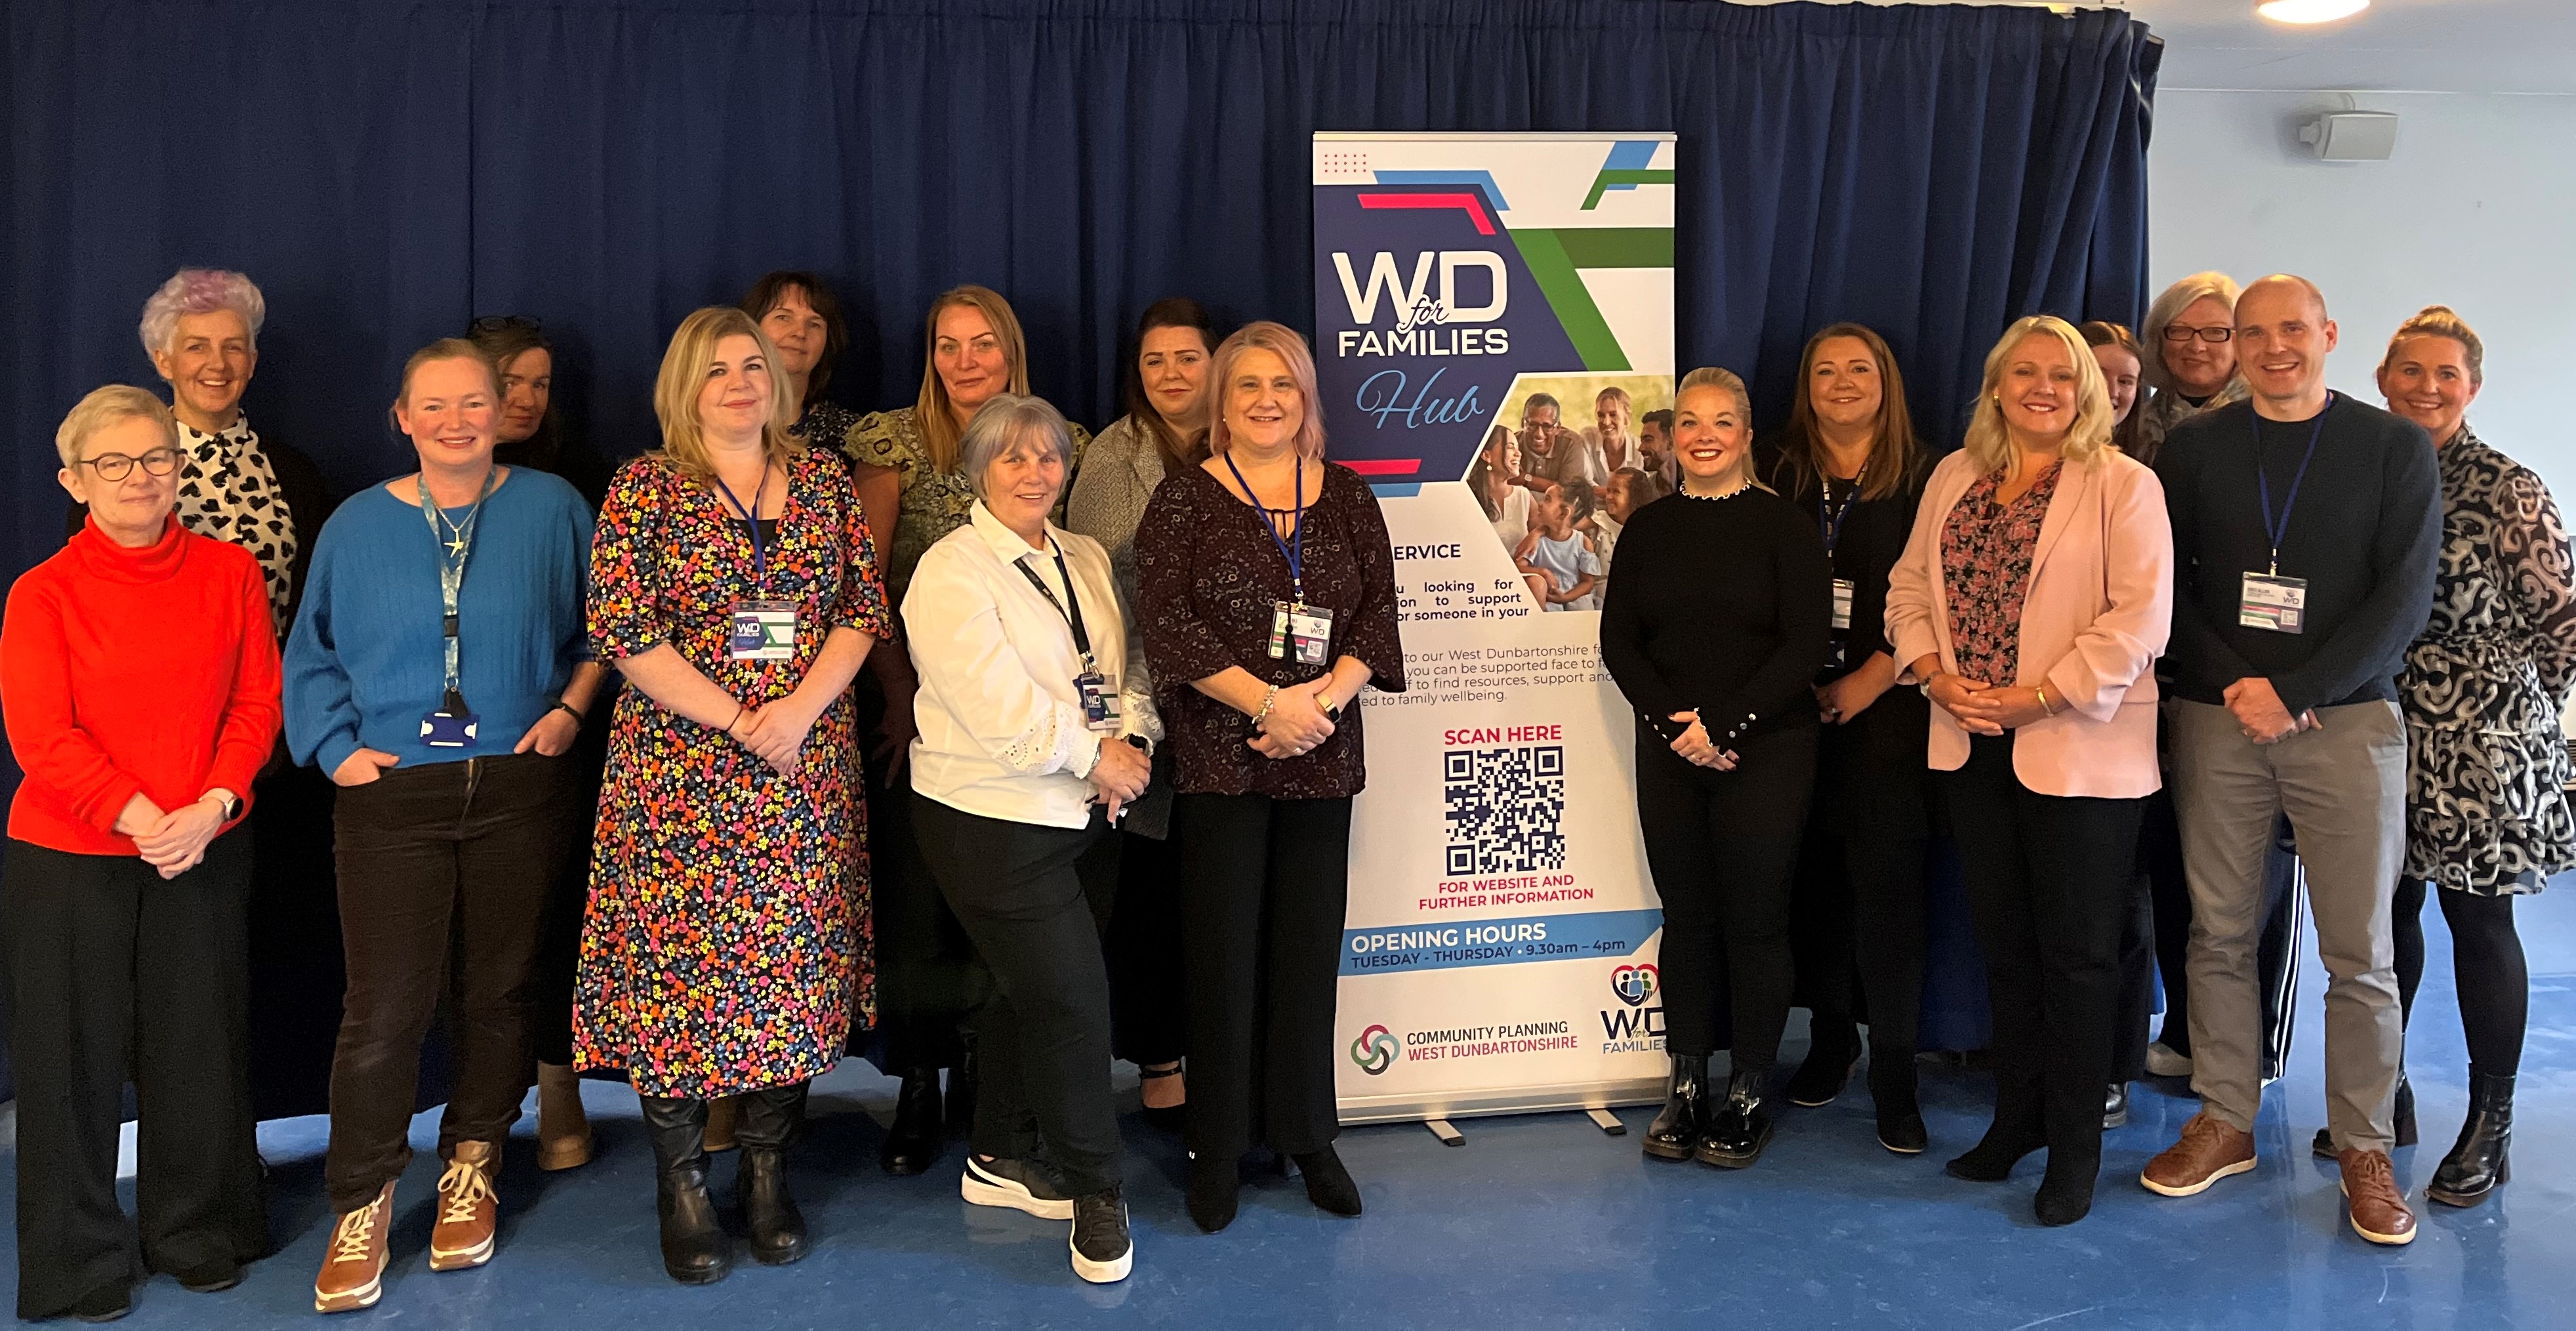 WDHCSP family hub launch, picture of staff at launch of family hub providing support to families in West Dunbartonshire